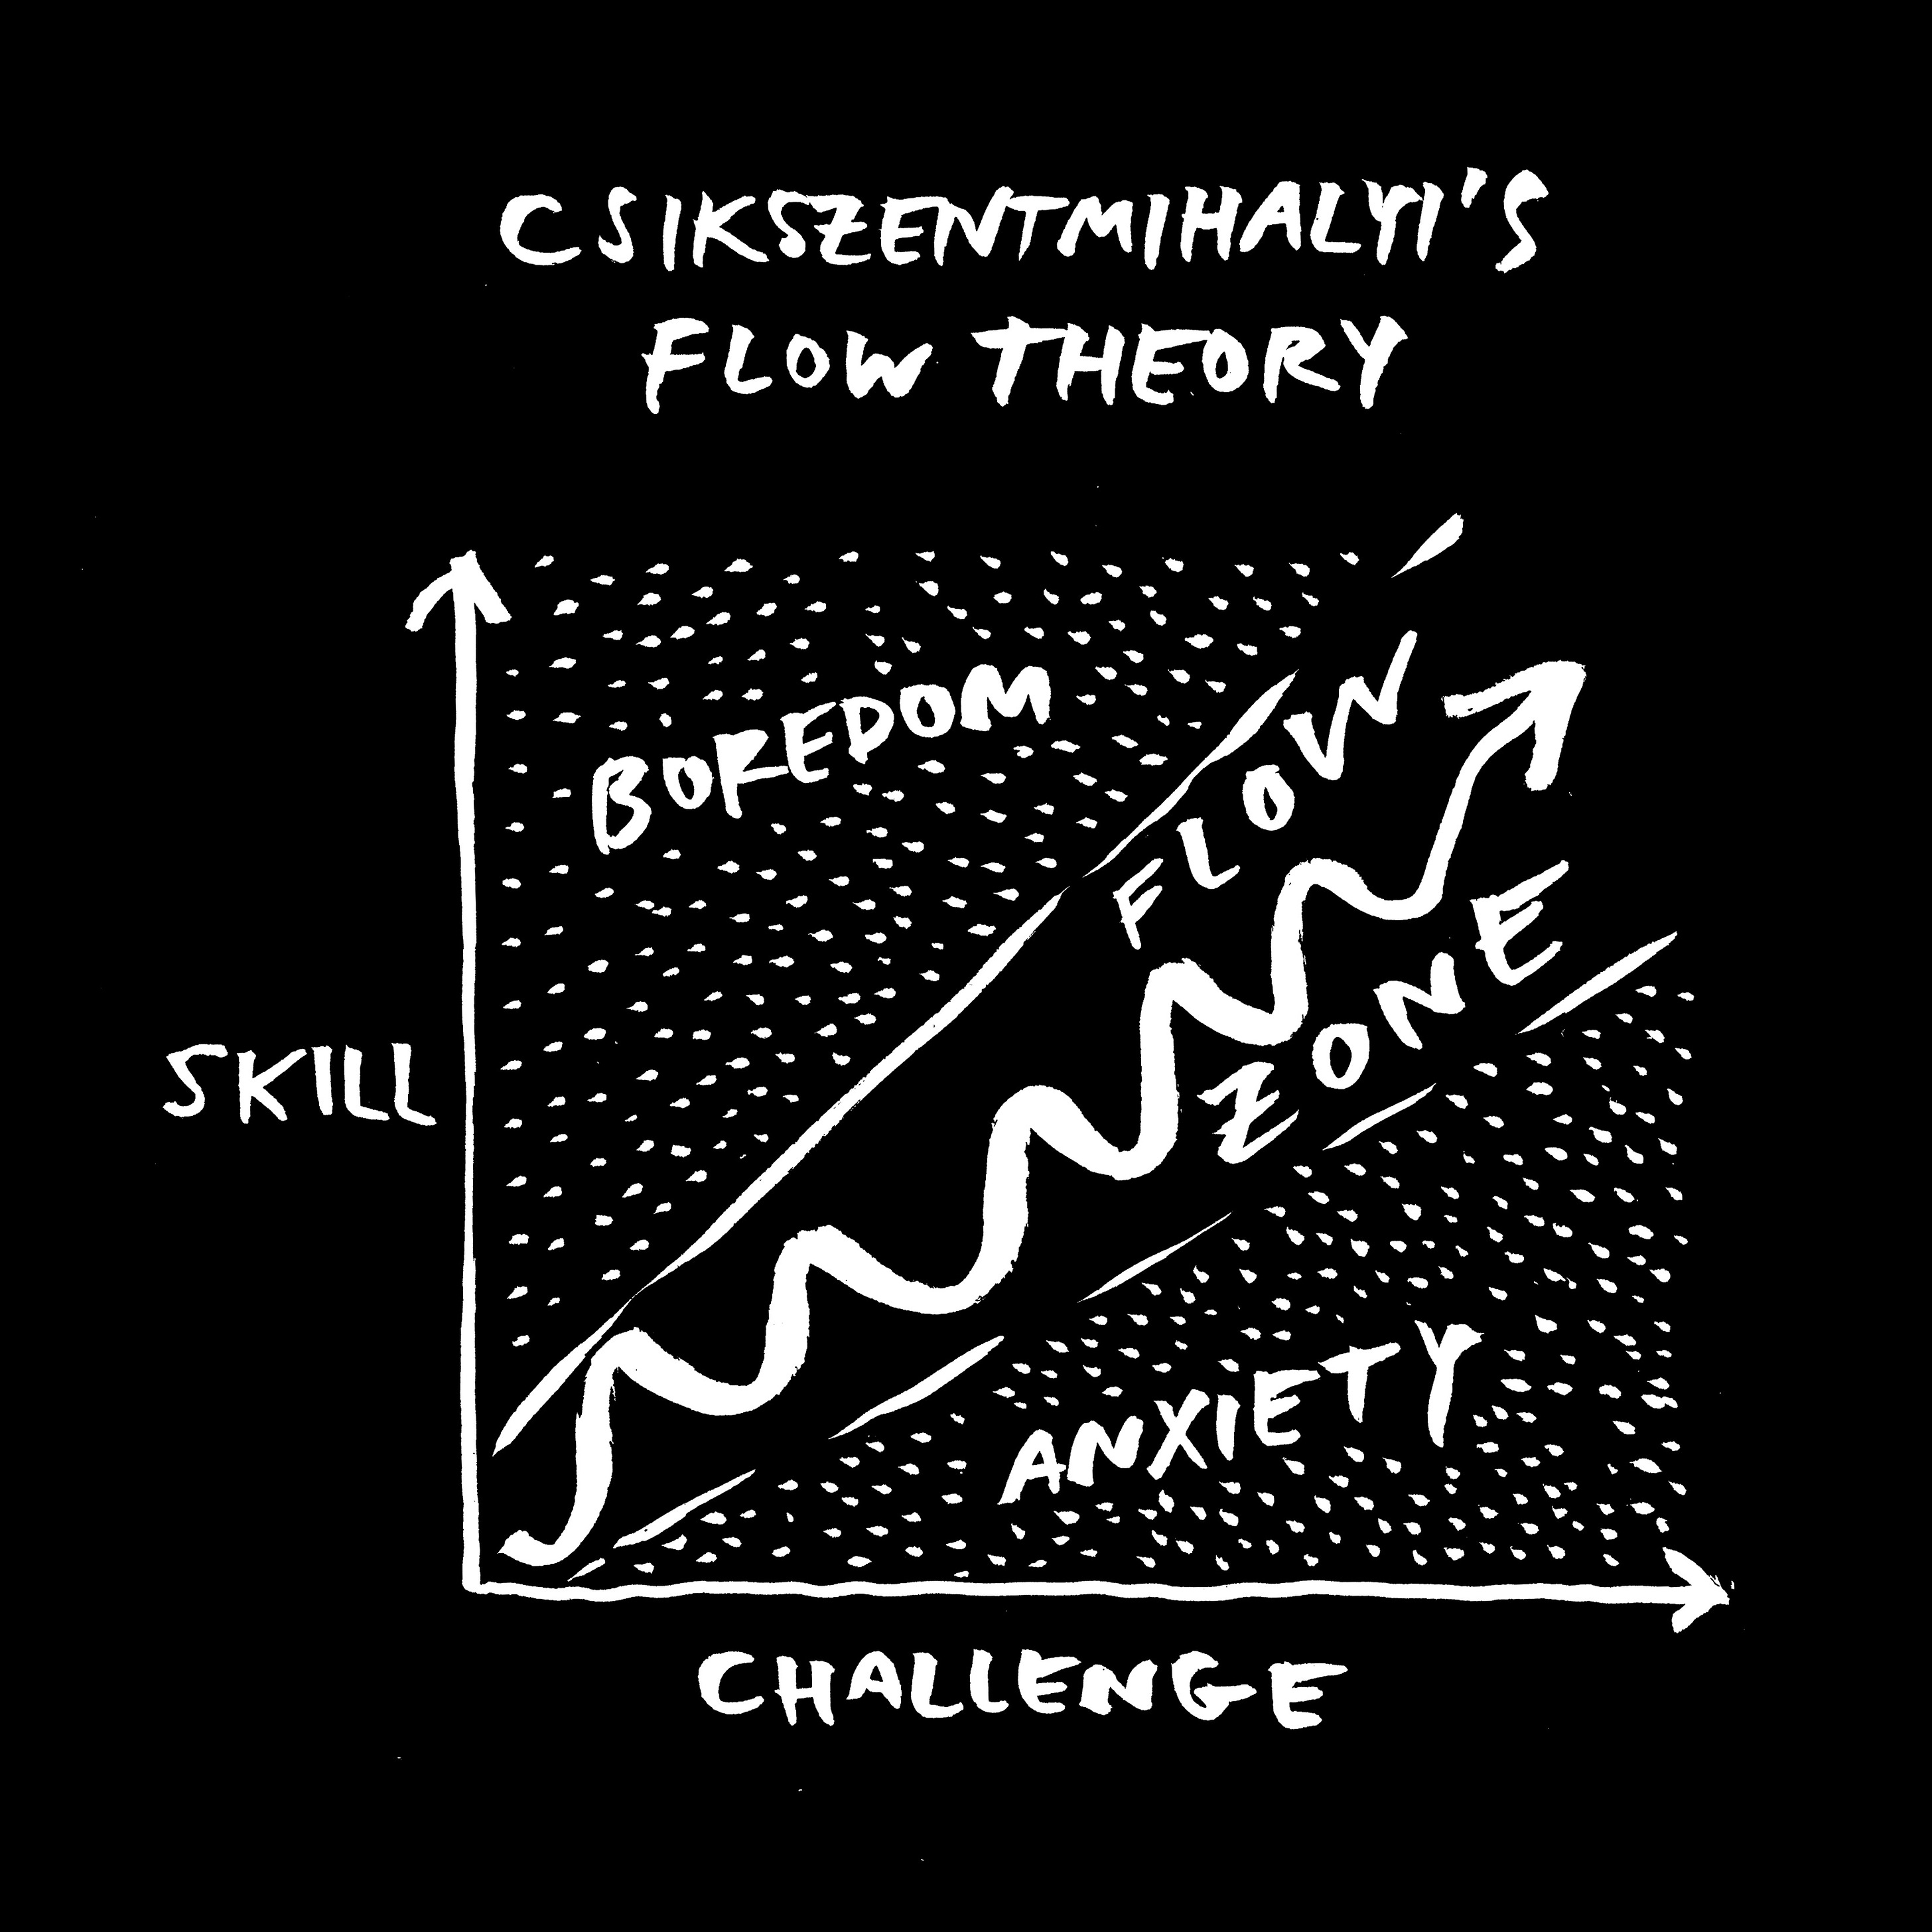 chart of flow theory